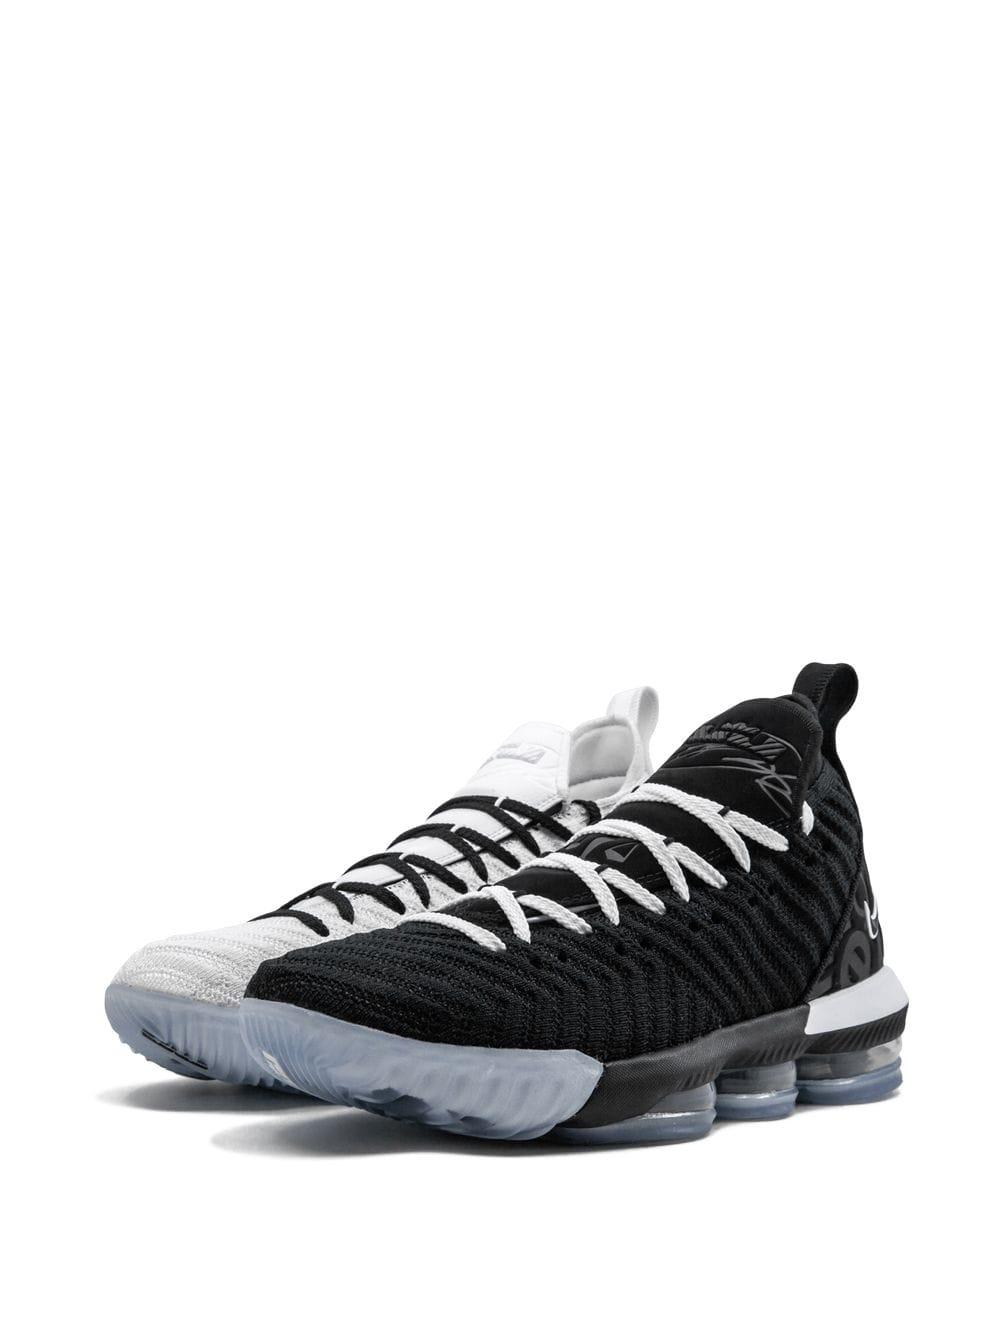 Nike Lebron 16 Sneakers in White for Men - Lyst